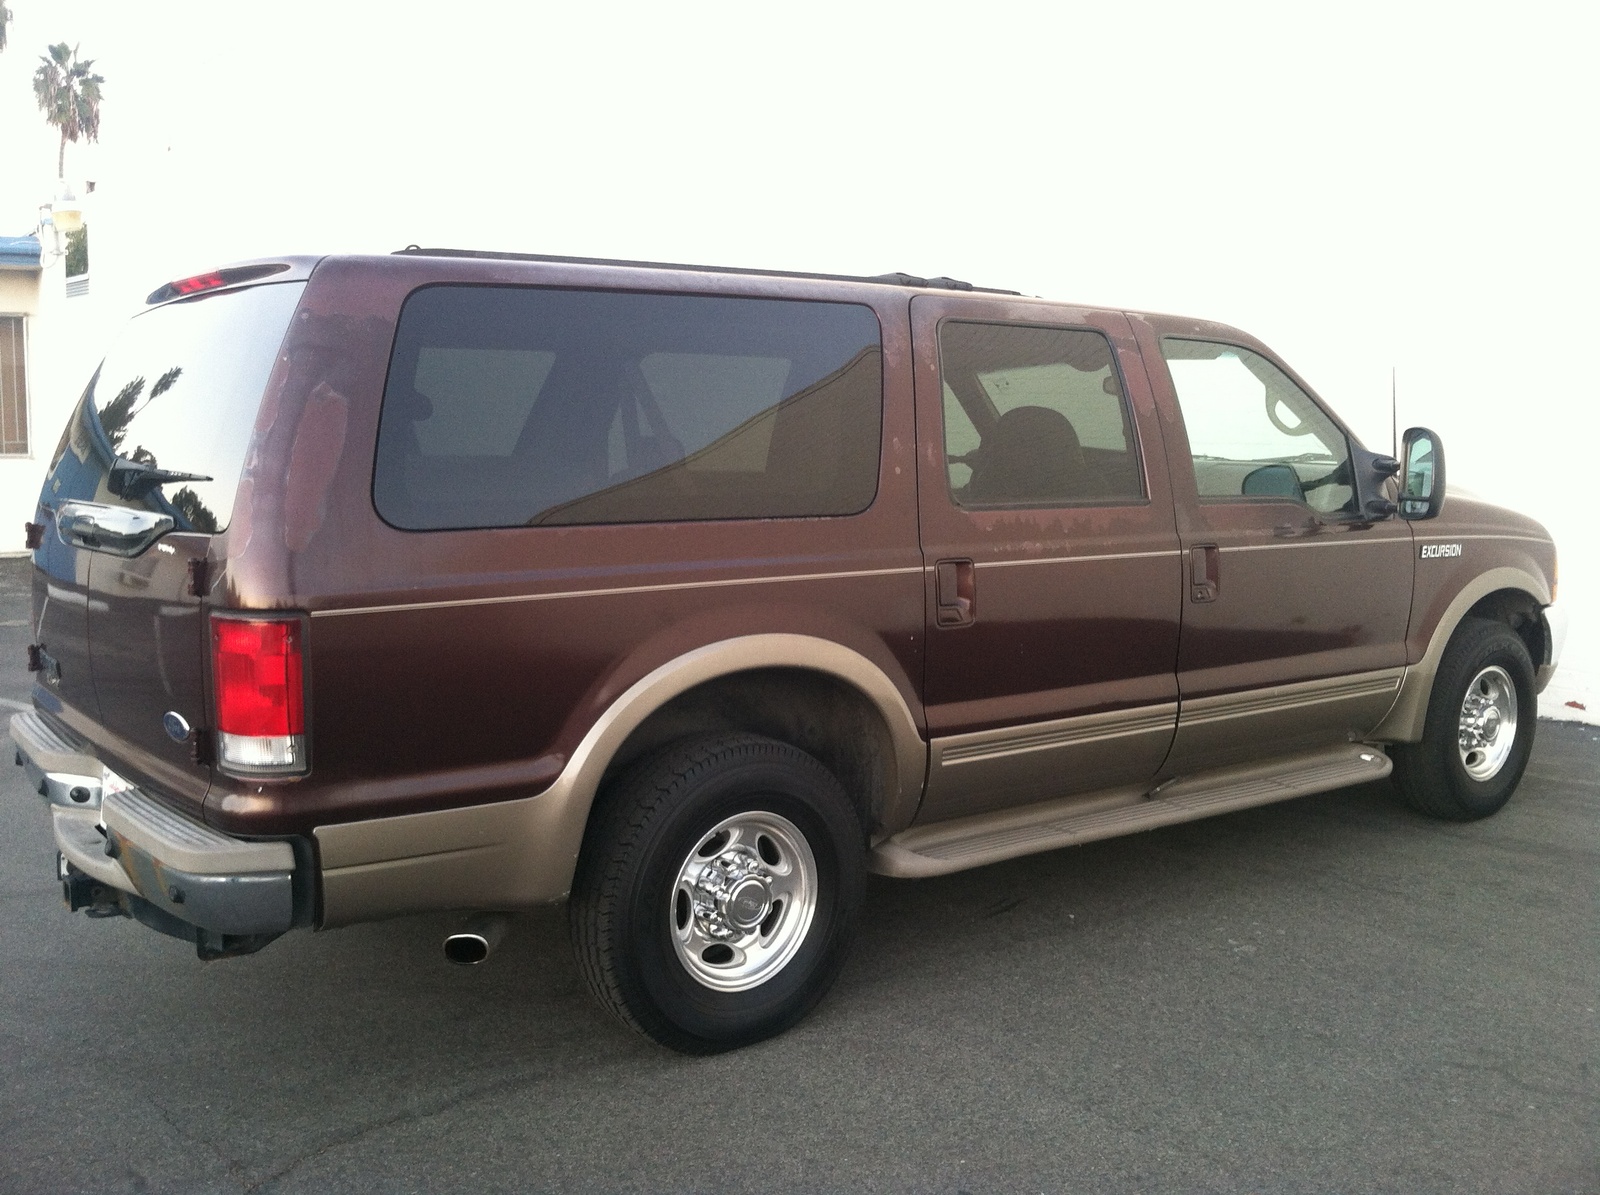 2001 Ford excursion ratings #6